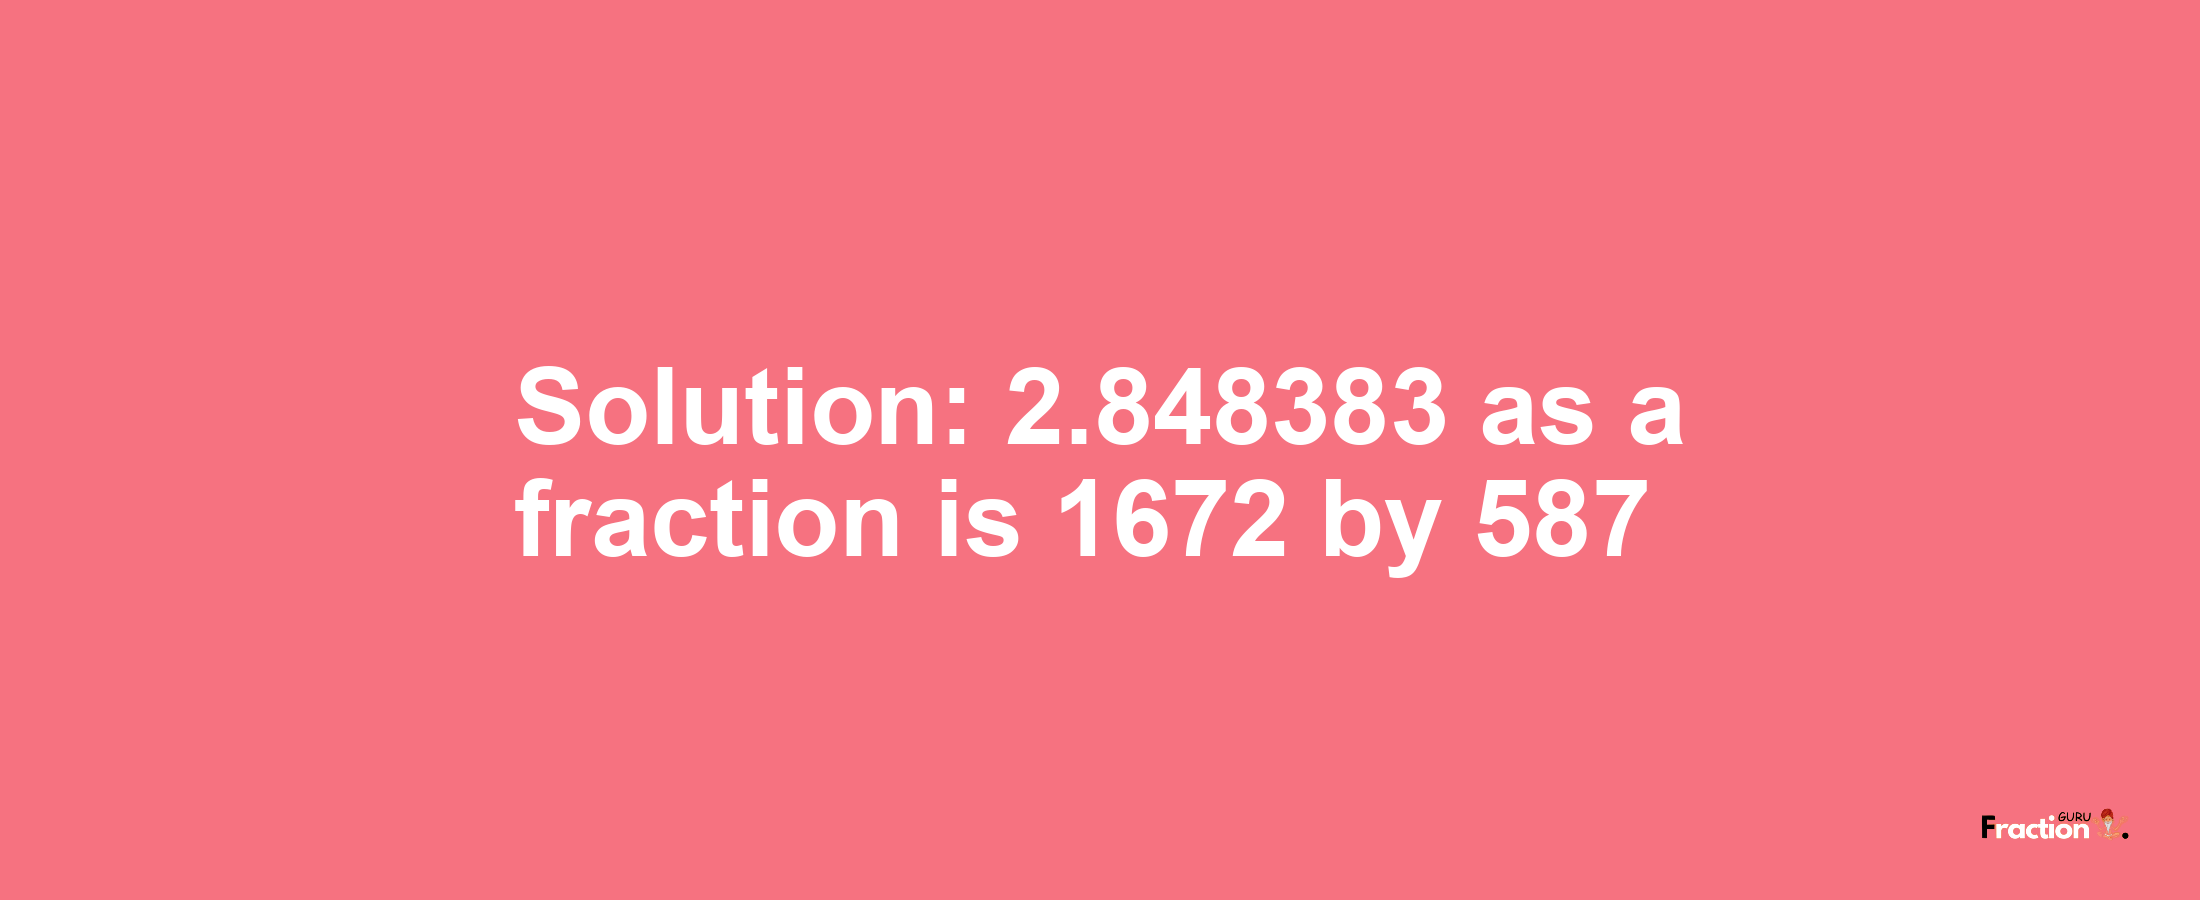 Solution:2.848383 as a fraction is 1672/587